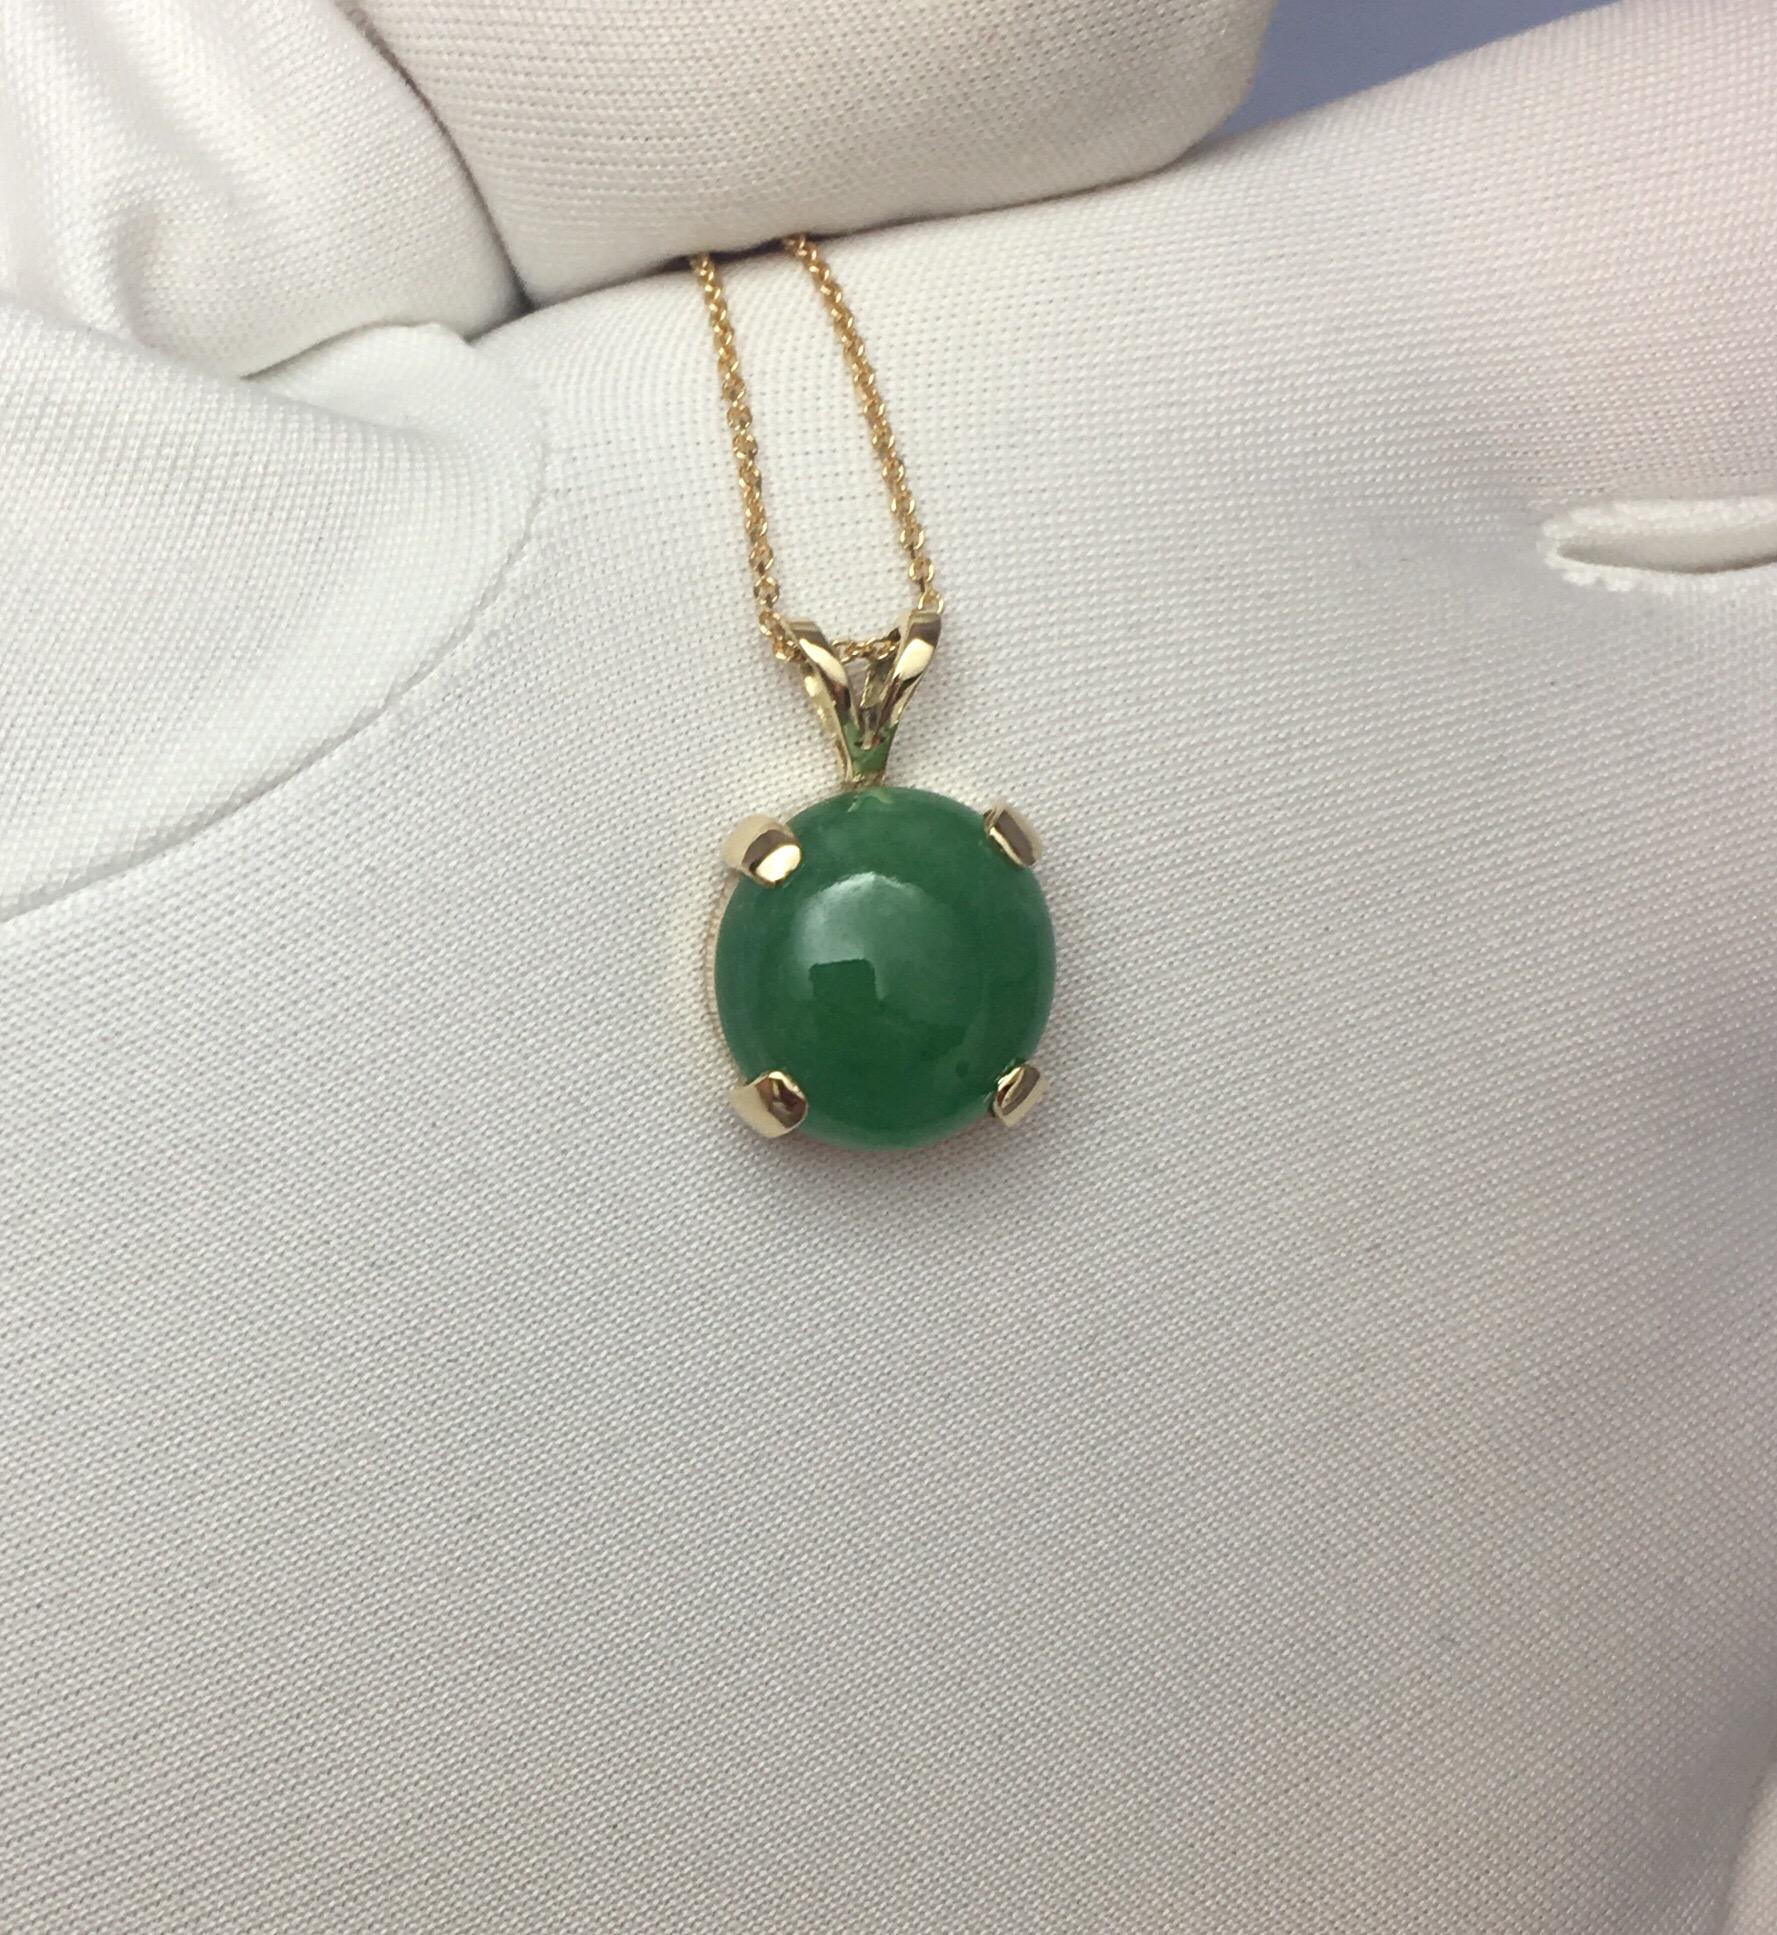 Stunning 4.90 carat untreated green jadeite jade set in a fine 14k yellow gold solitaire pendant.

Has an excellent round cabochon cut showing the colour very nicely.

Comes with GCS London Certificate confirming stone as natural and untreated.

The